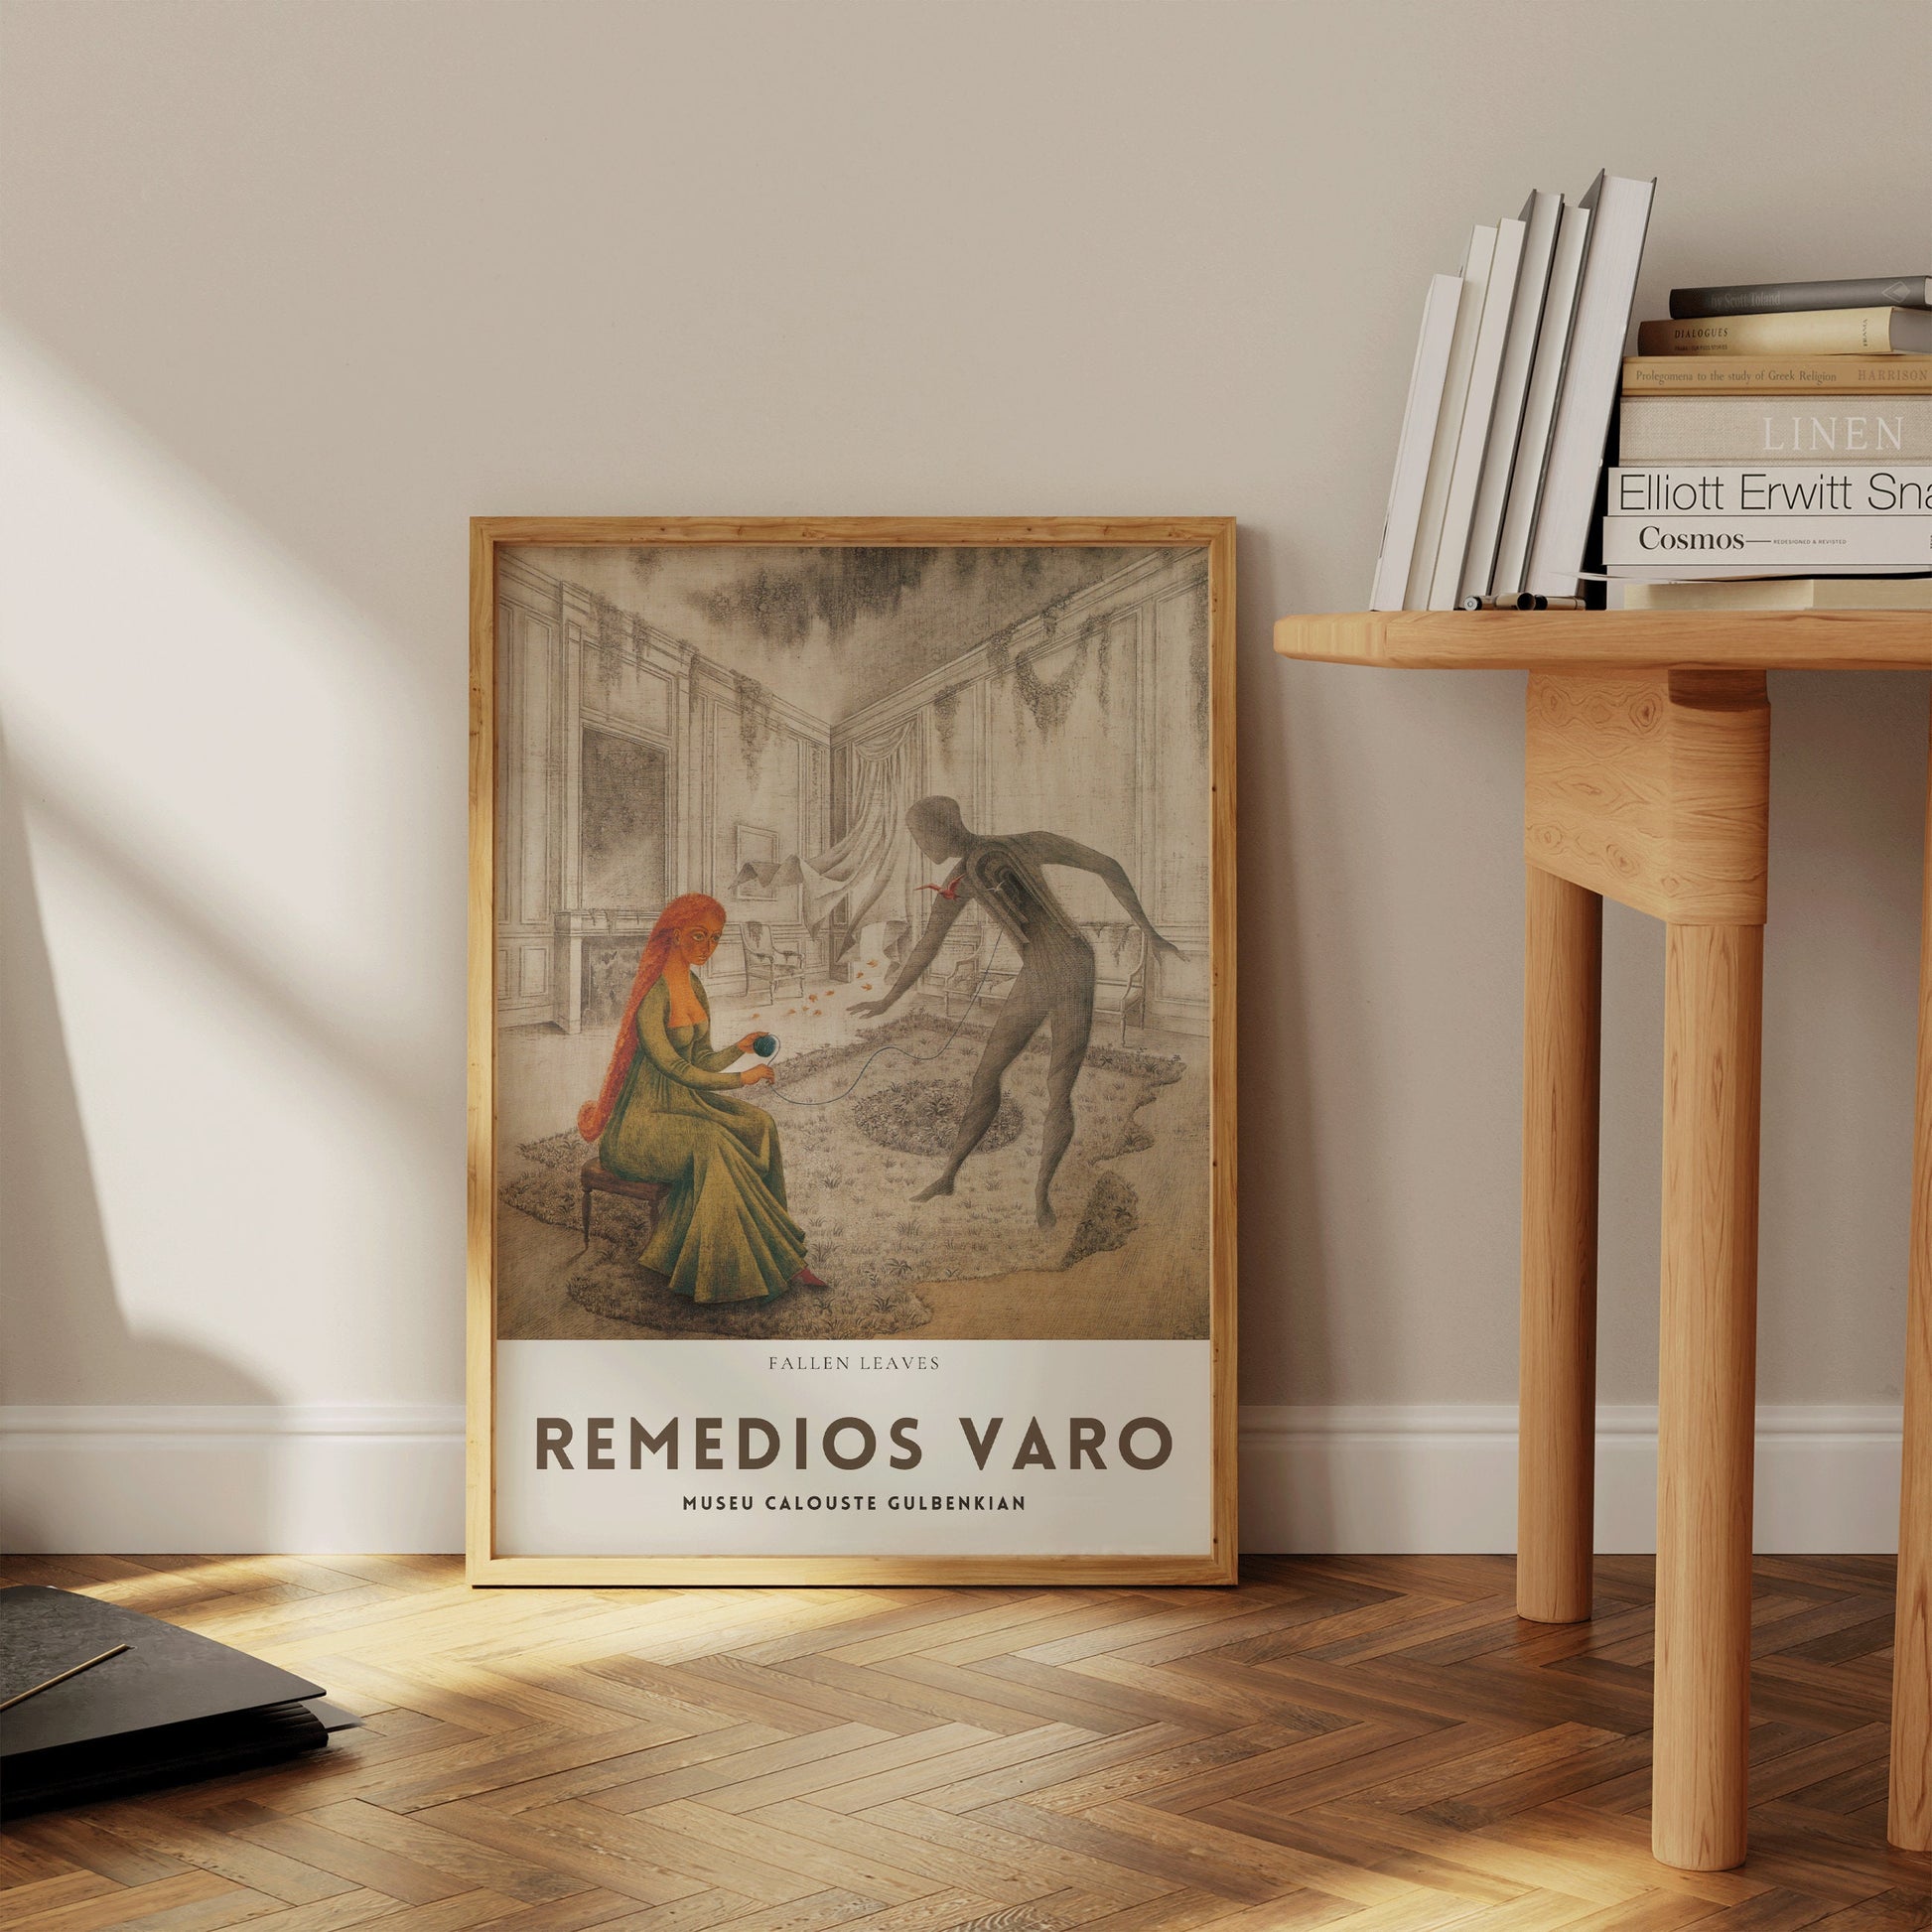 Remedios Varo Fallen Leaves Fine Surreal Art Famous Mexican Iconic Painting Vintage Ready to hang Framed Home Office Decor Print Gift Idea